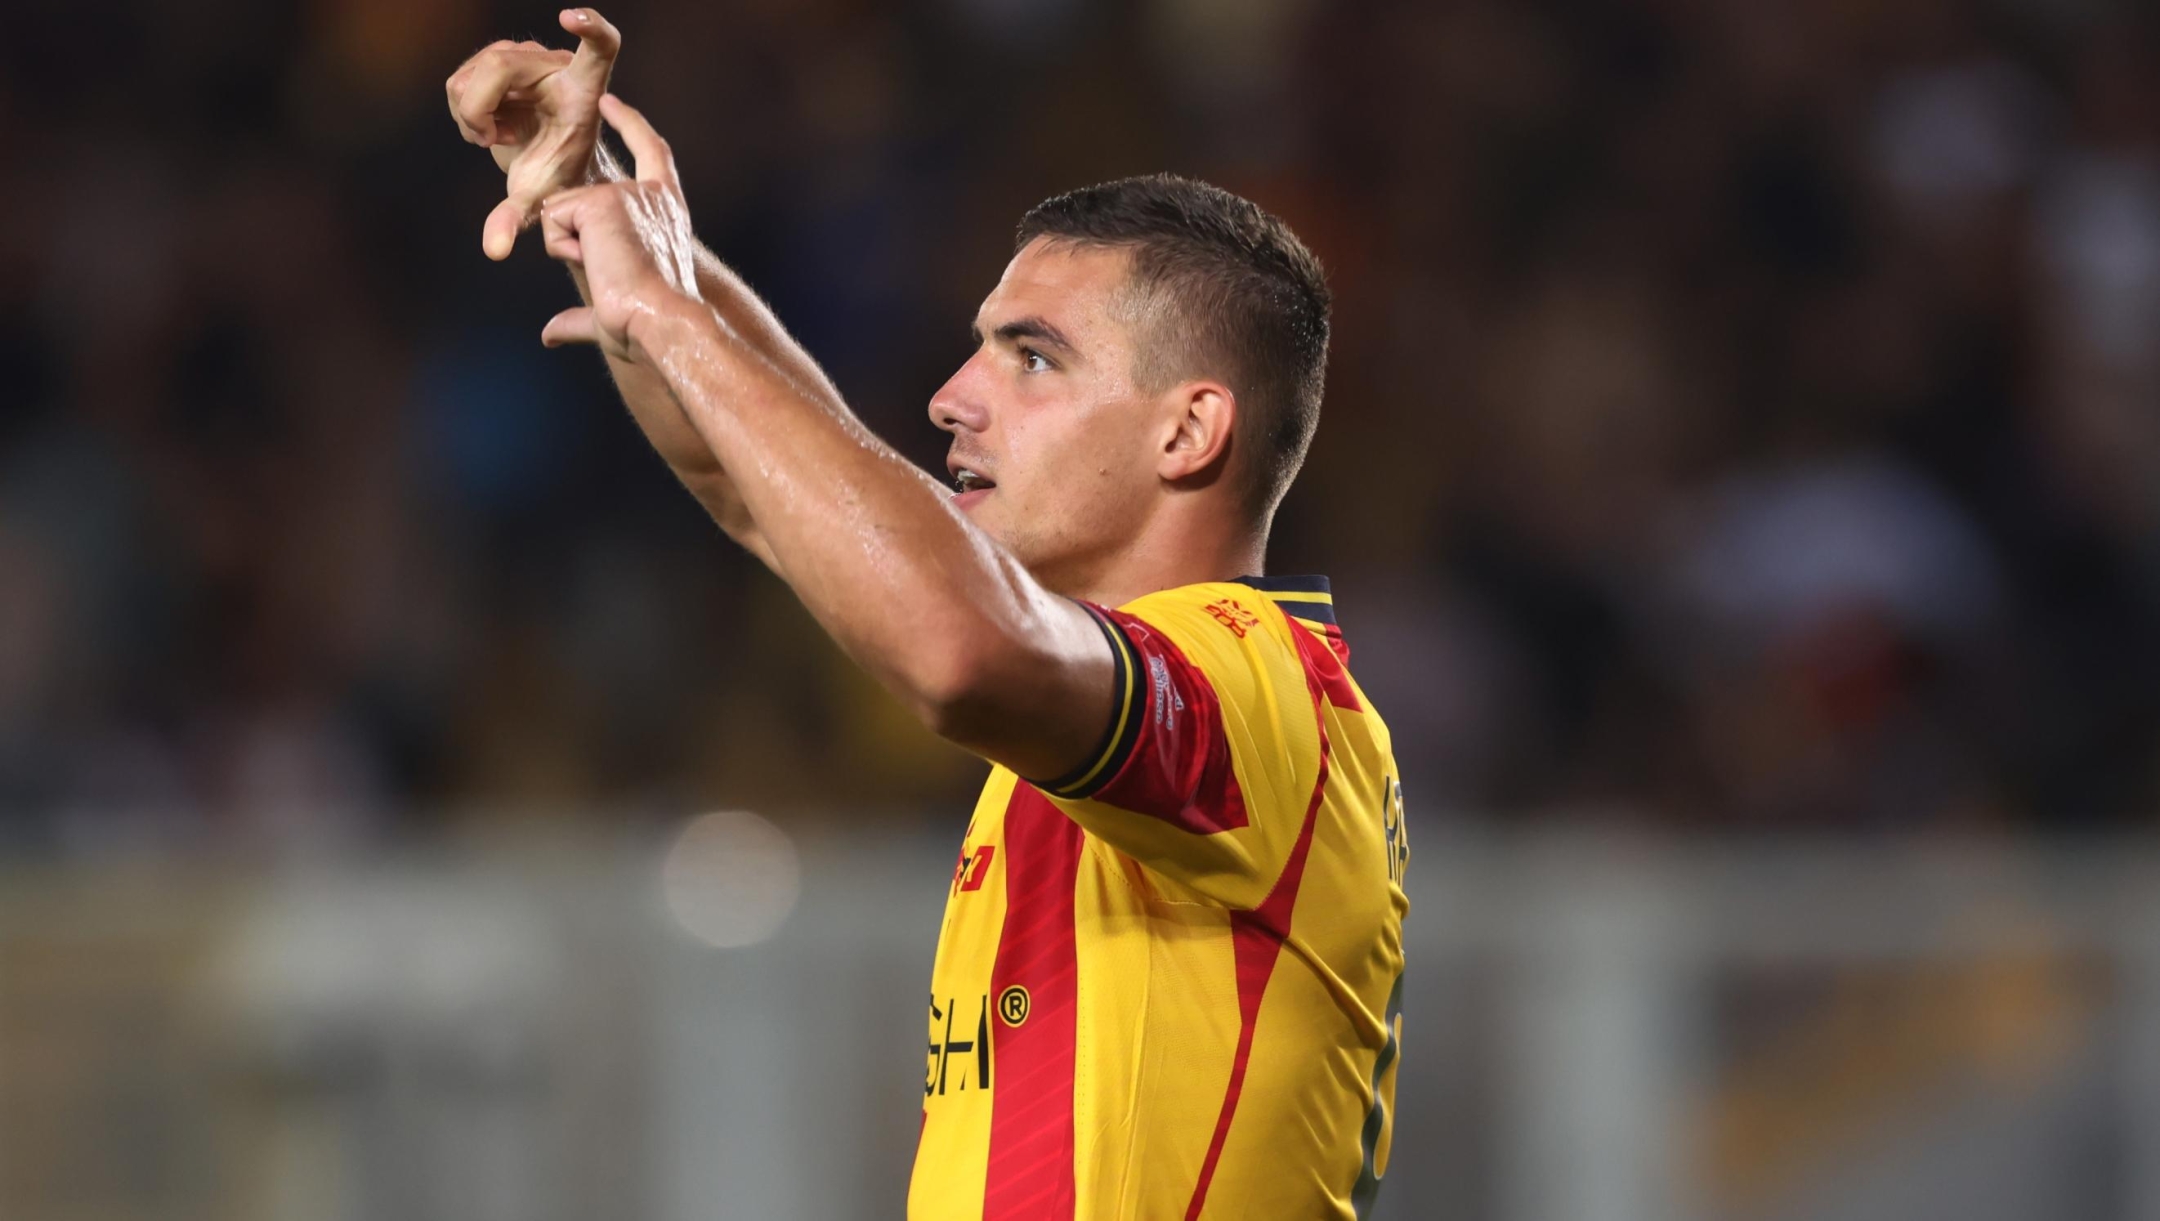 LECCE, ITALY - SEPTEMBER 03: Nikola Krstovic of Lecce celebrates after scoring his team's opening goal during the Serie A TIM match between US Lecce and US Salernitana at Stadio Via del Mare on September 03, 2023 in Lecce, Italy. (Photo by Maurizio Lagana/Getty Images)